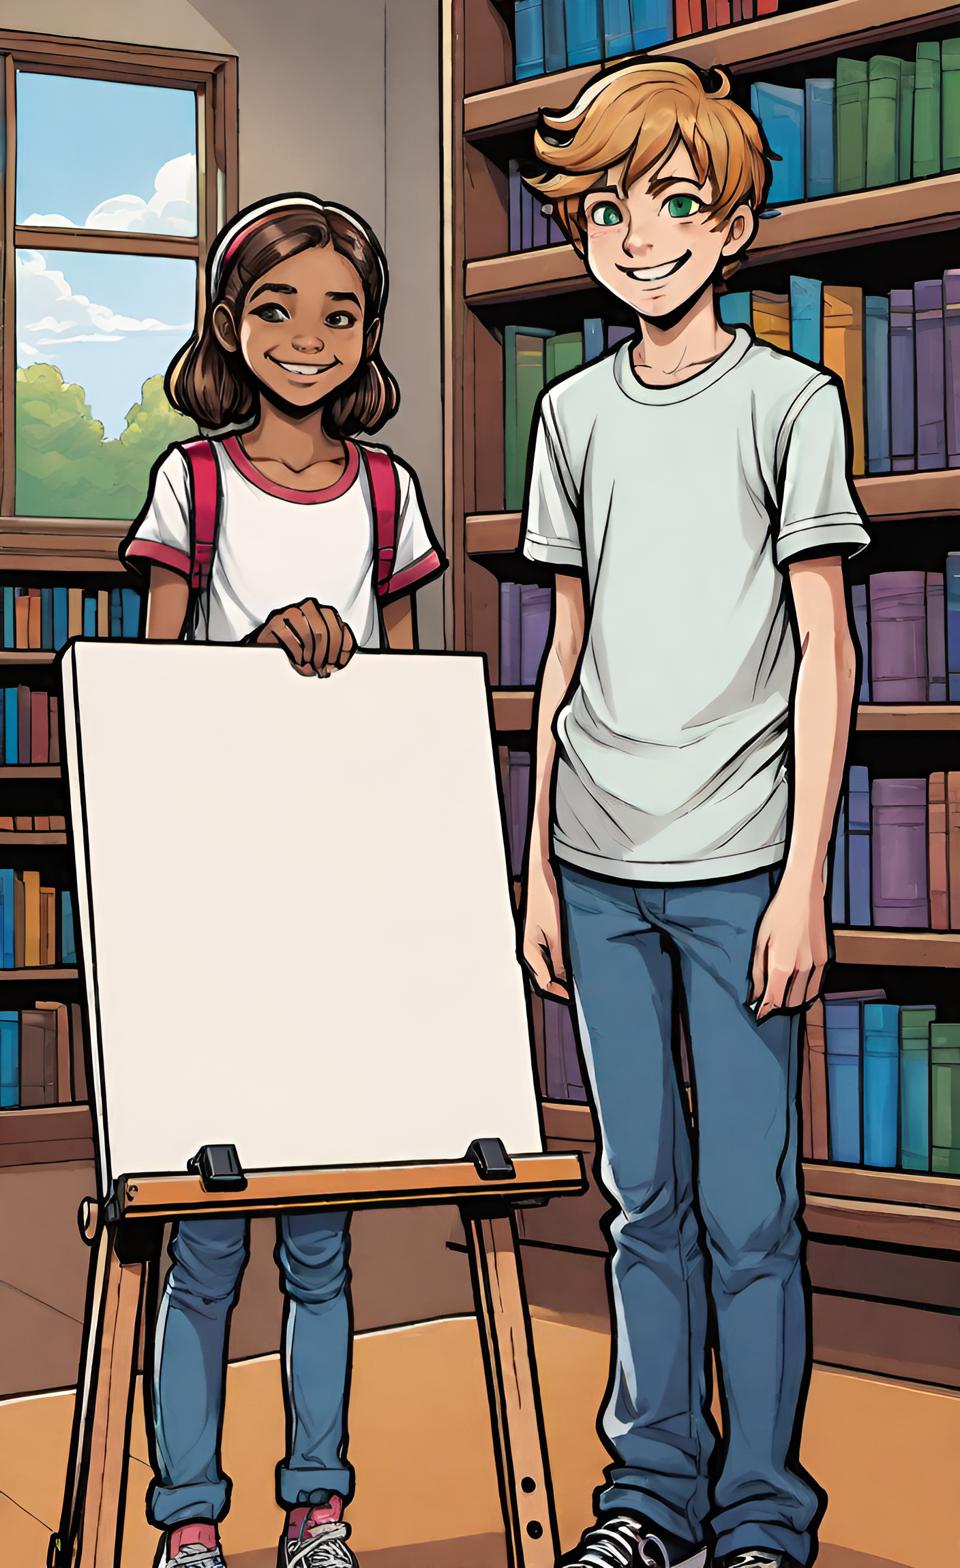 AI generated cartoon of 2 teens standing in a library with a blank canvas